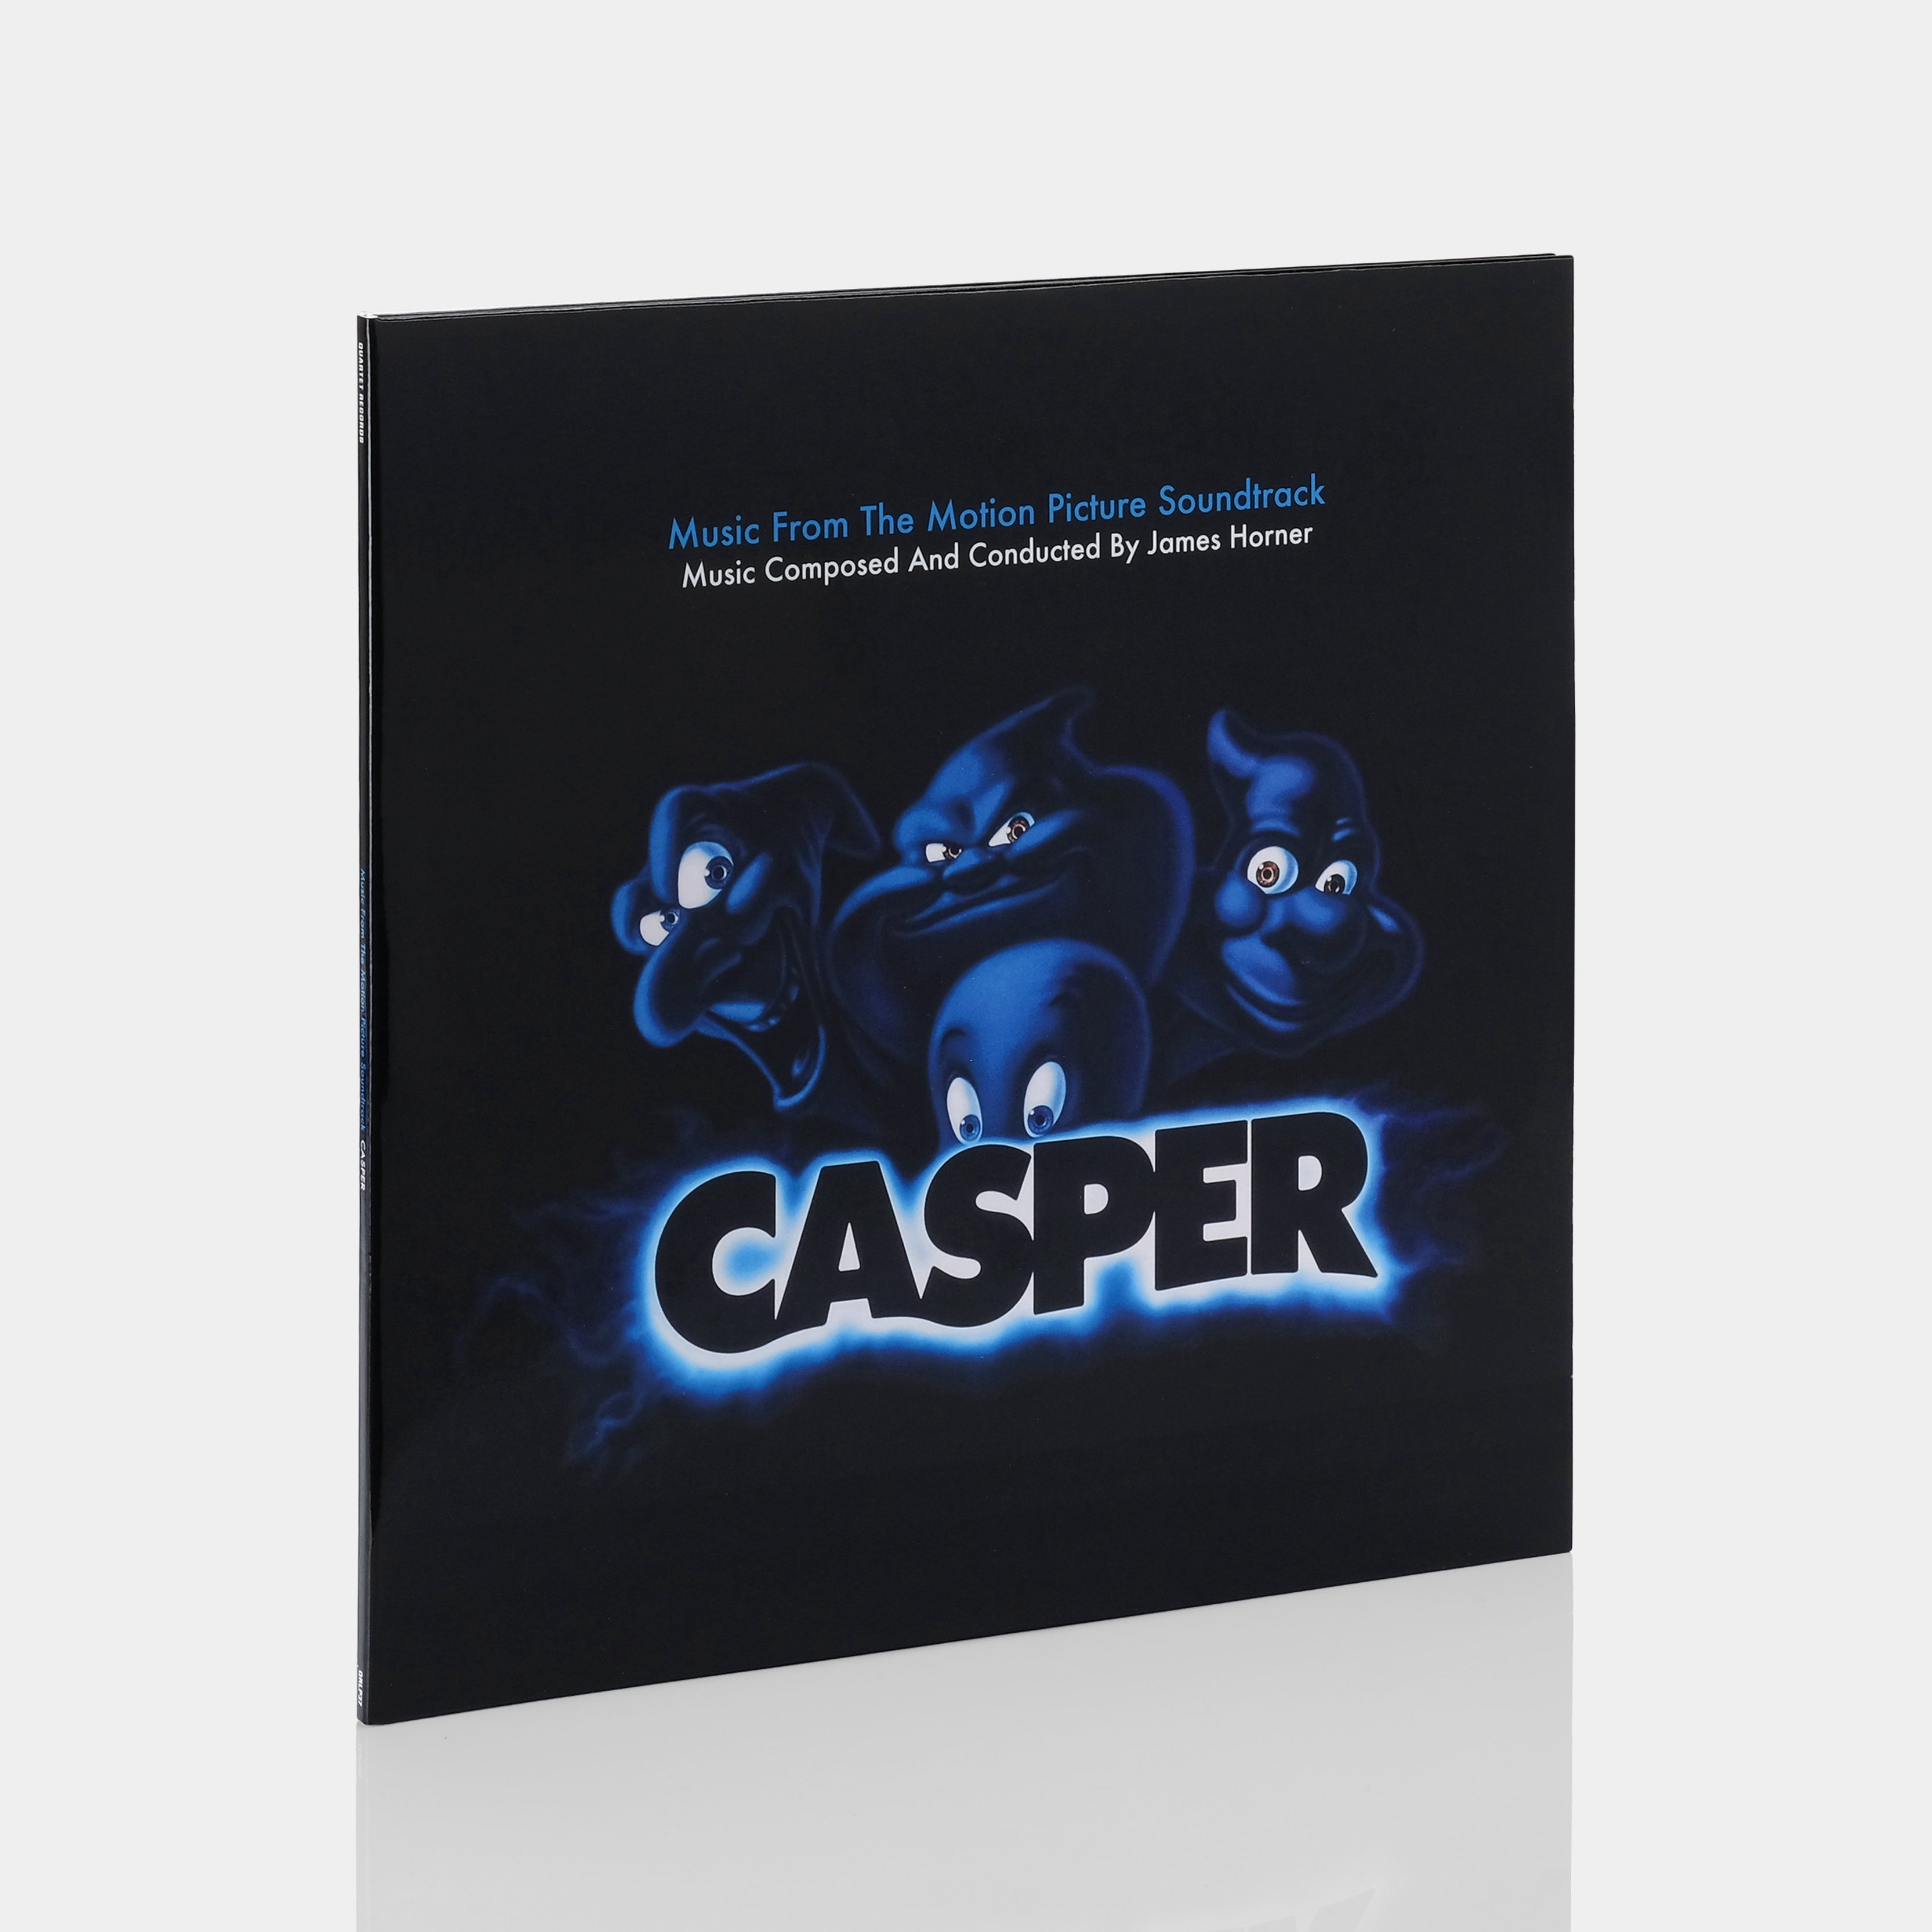 James Horner - Casper (Music From The Motion Picture Soundtrack) 2xLP Clear Vinyl Record